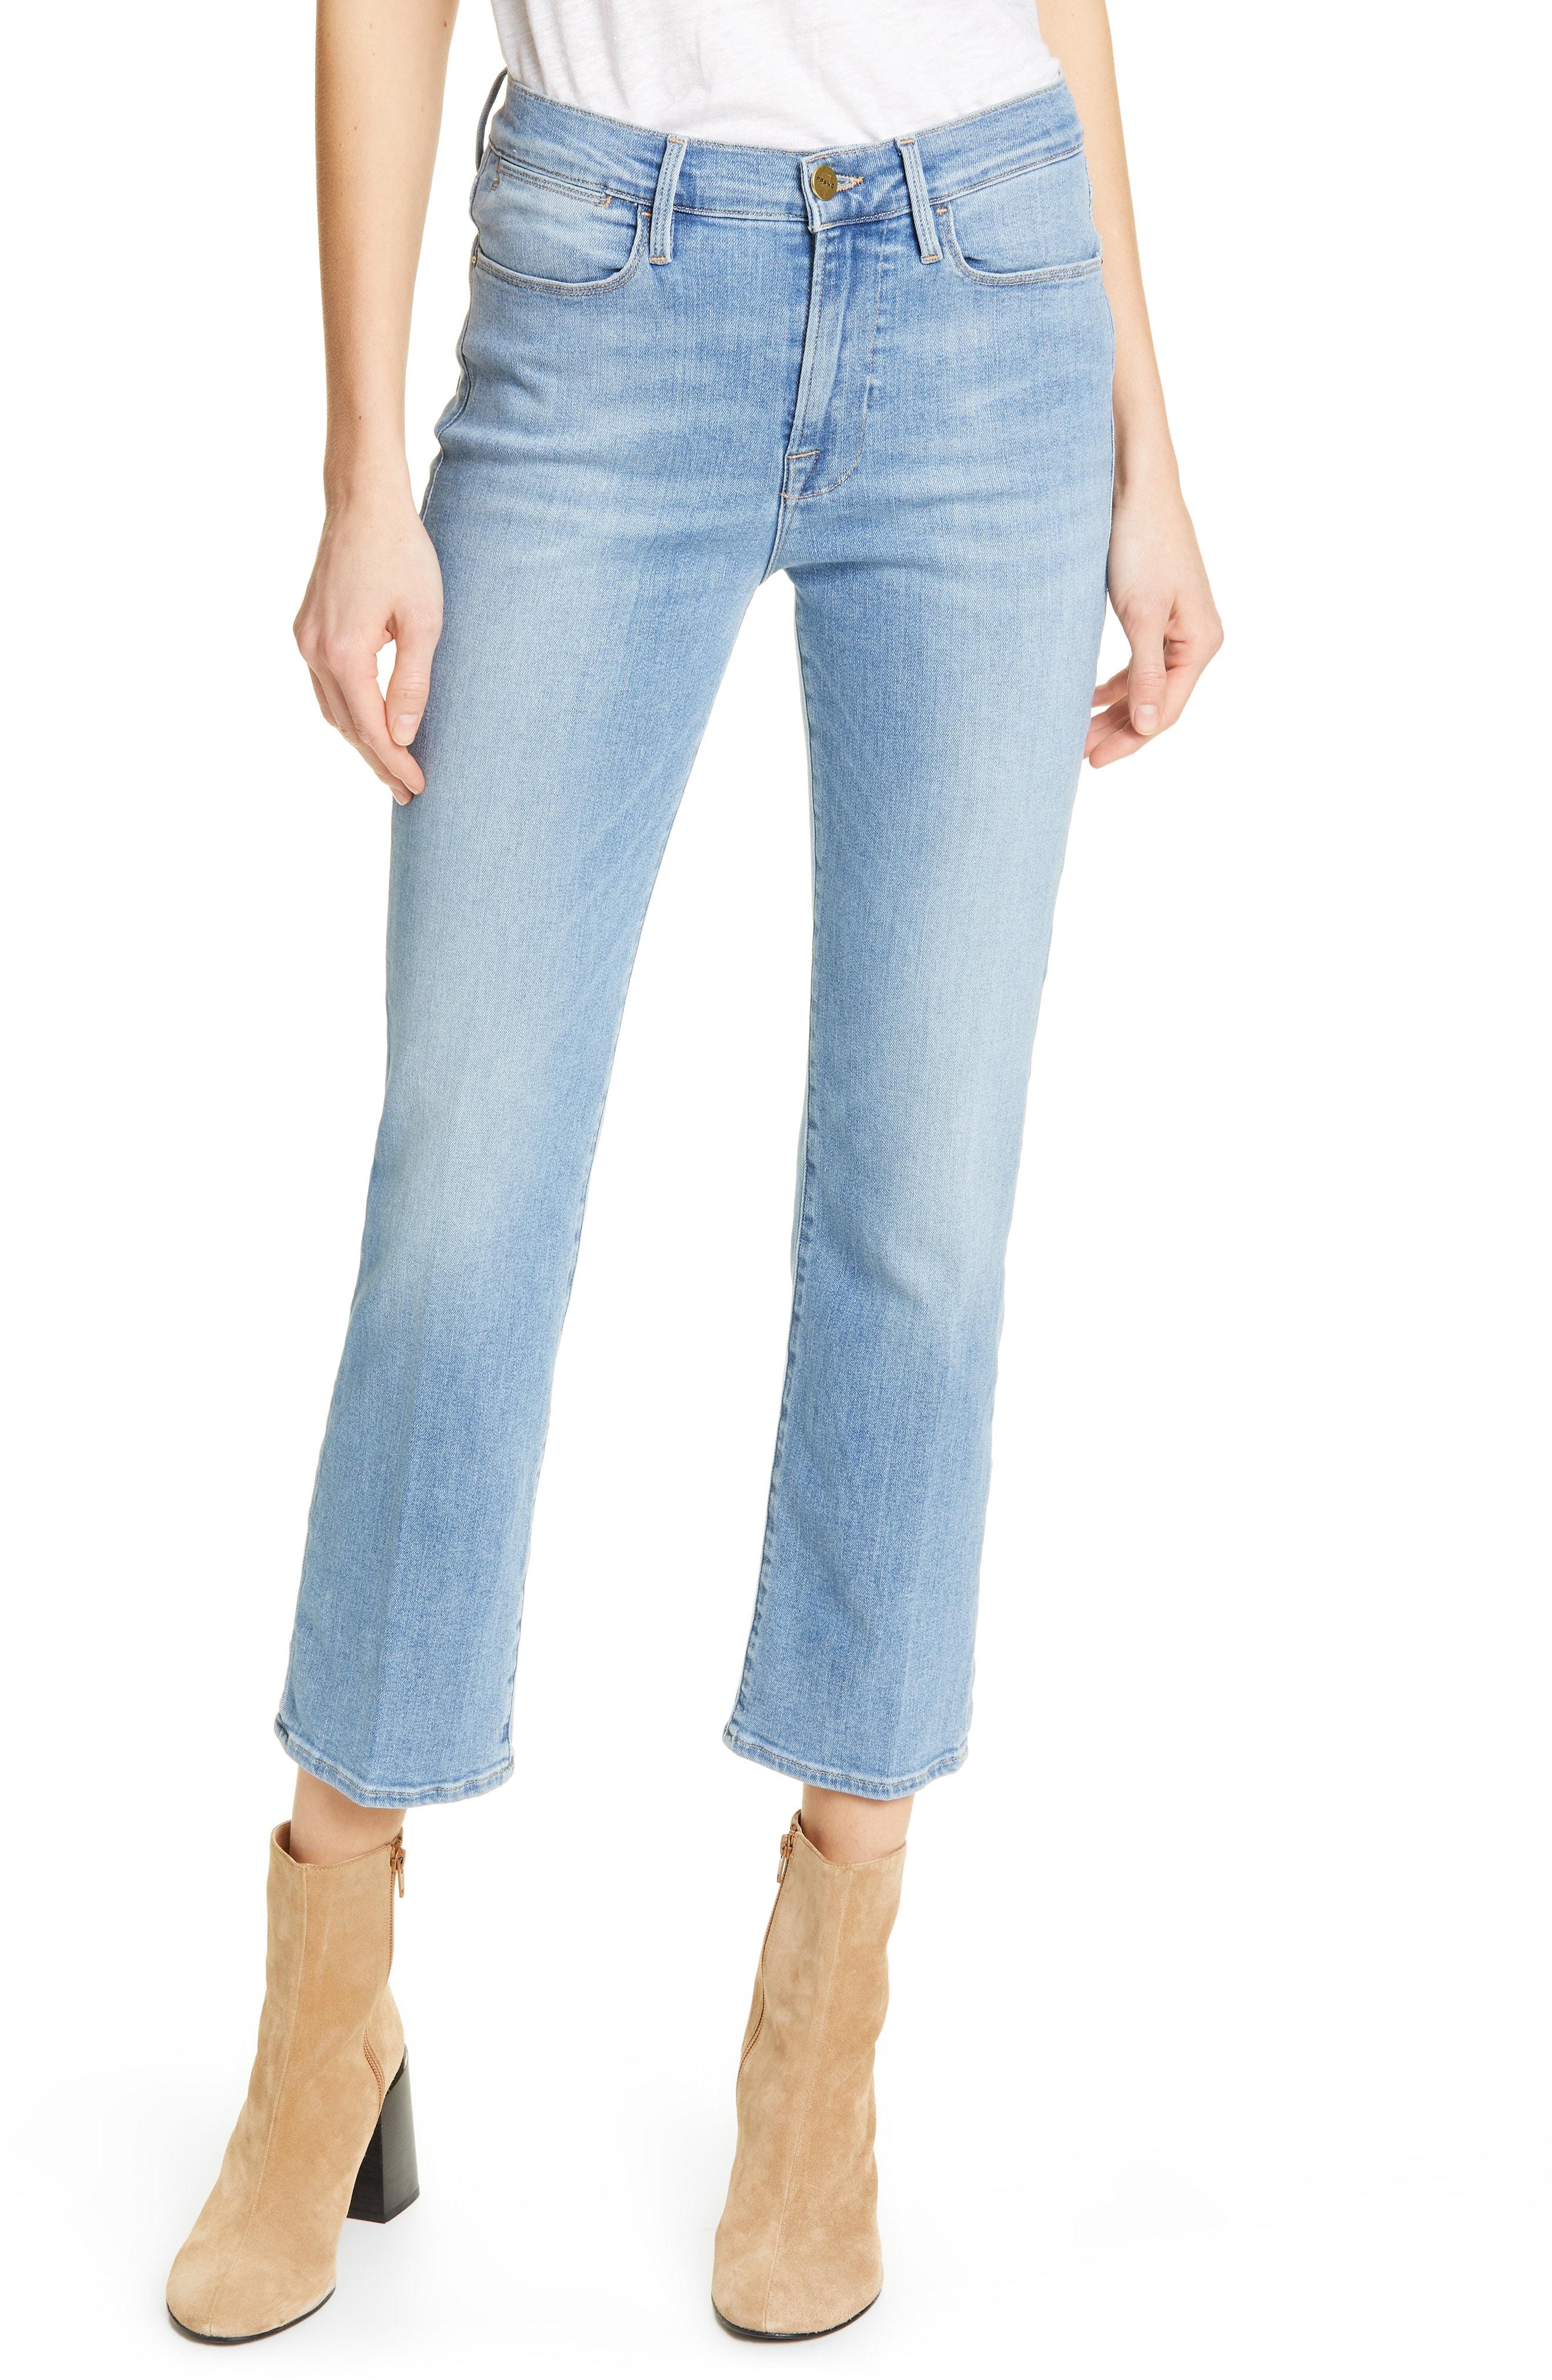 Lyst FRAME Le High Ankle Straight Leg Jeans in Blue